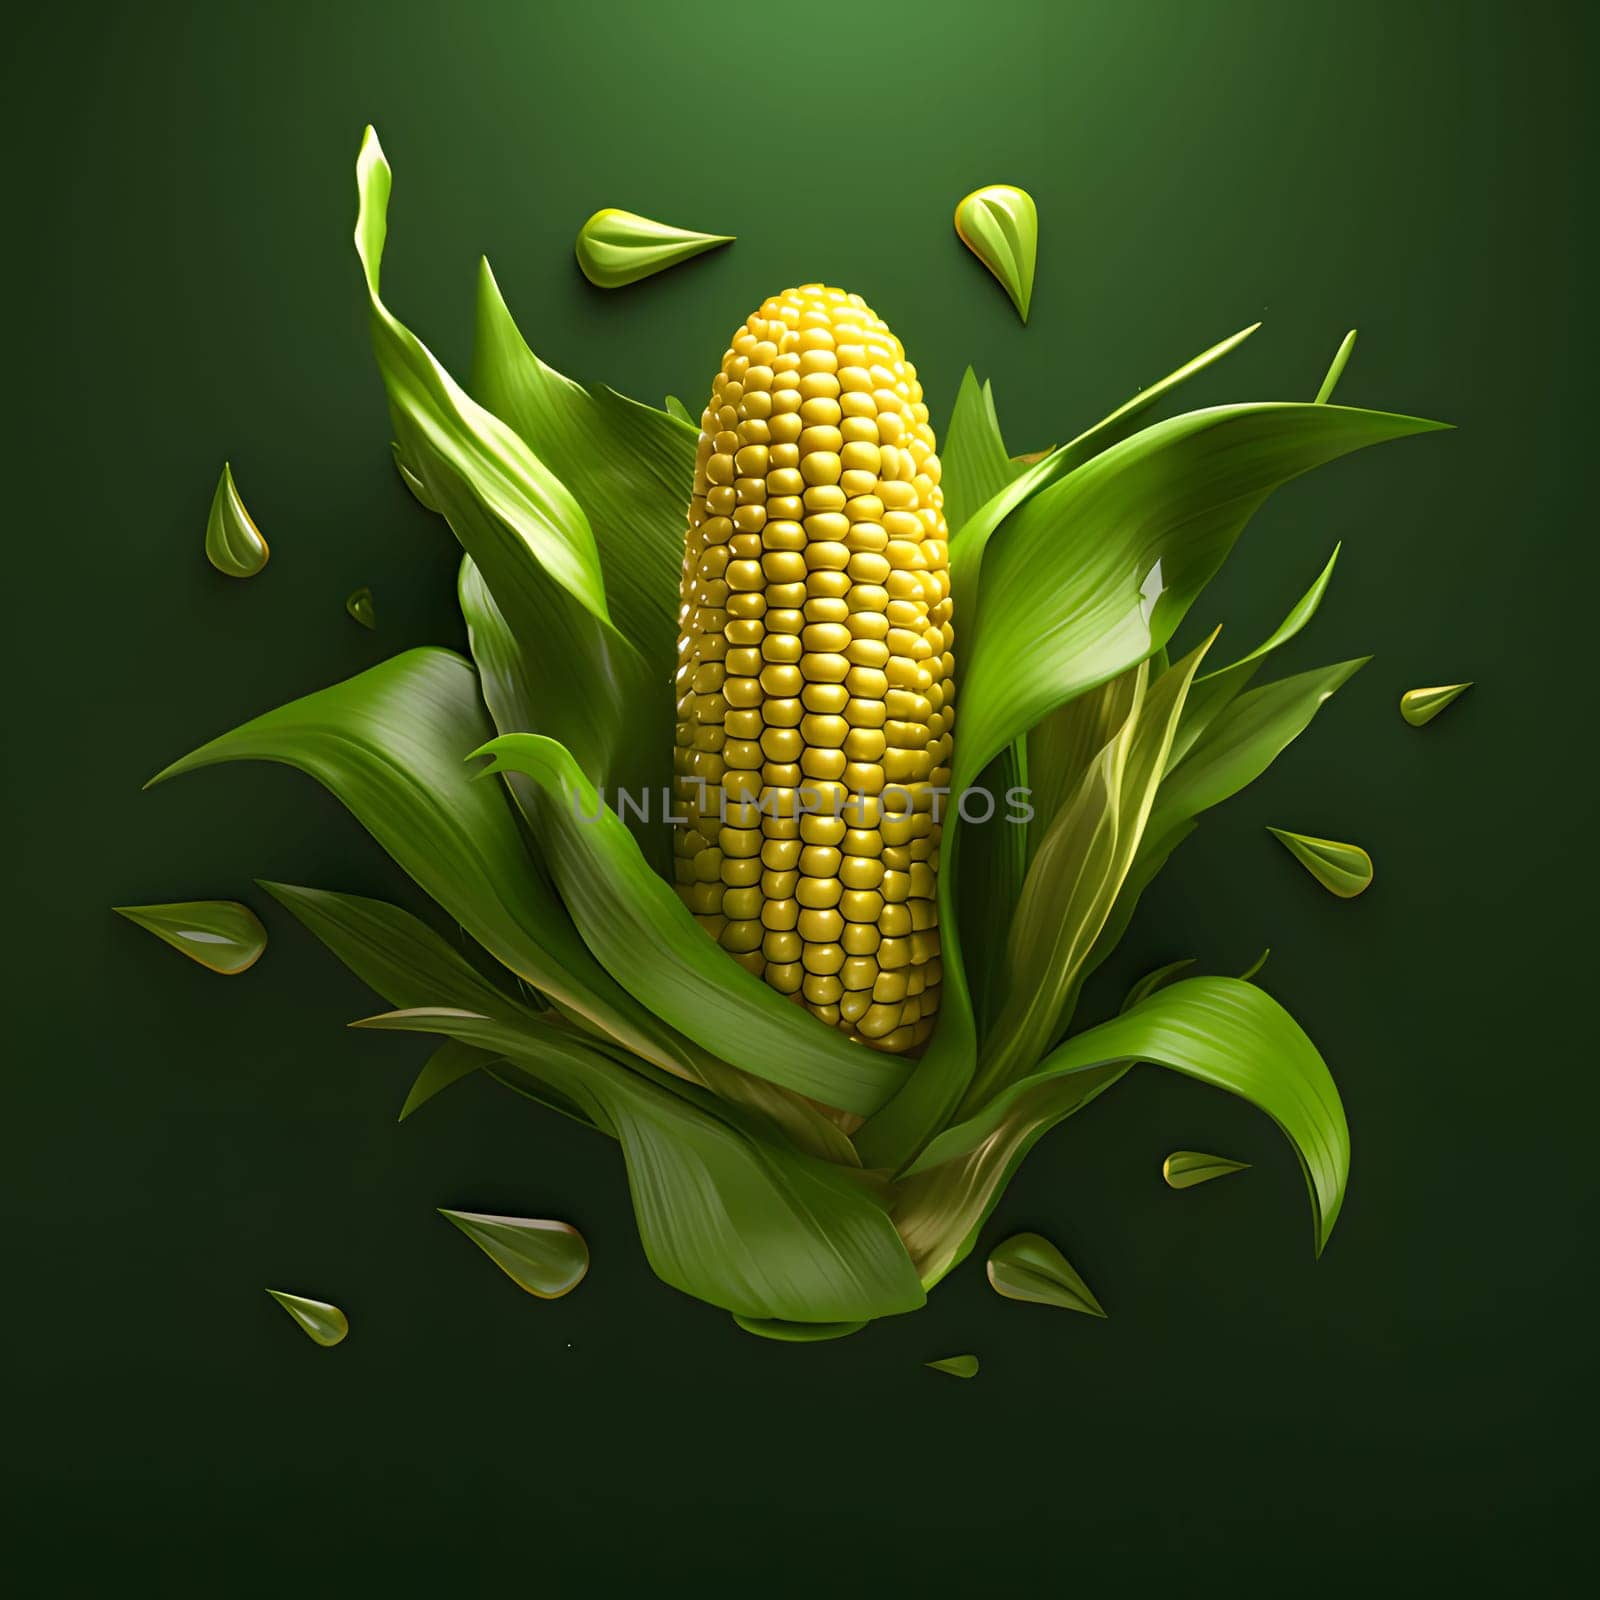 Cob of corn in green Leaf on a solid dark background. Corn as a dish of thanksgiving for the harvest. by ThemesS